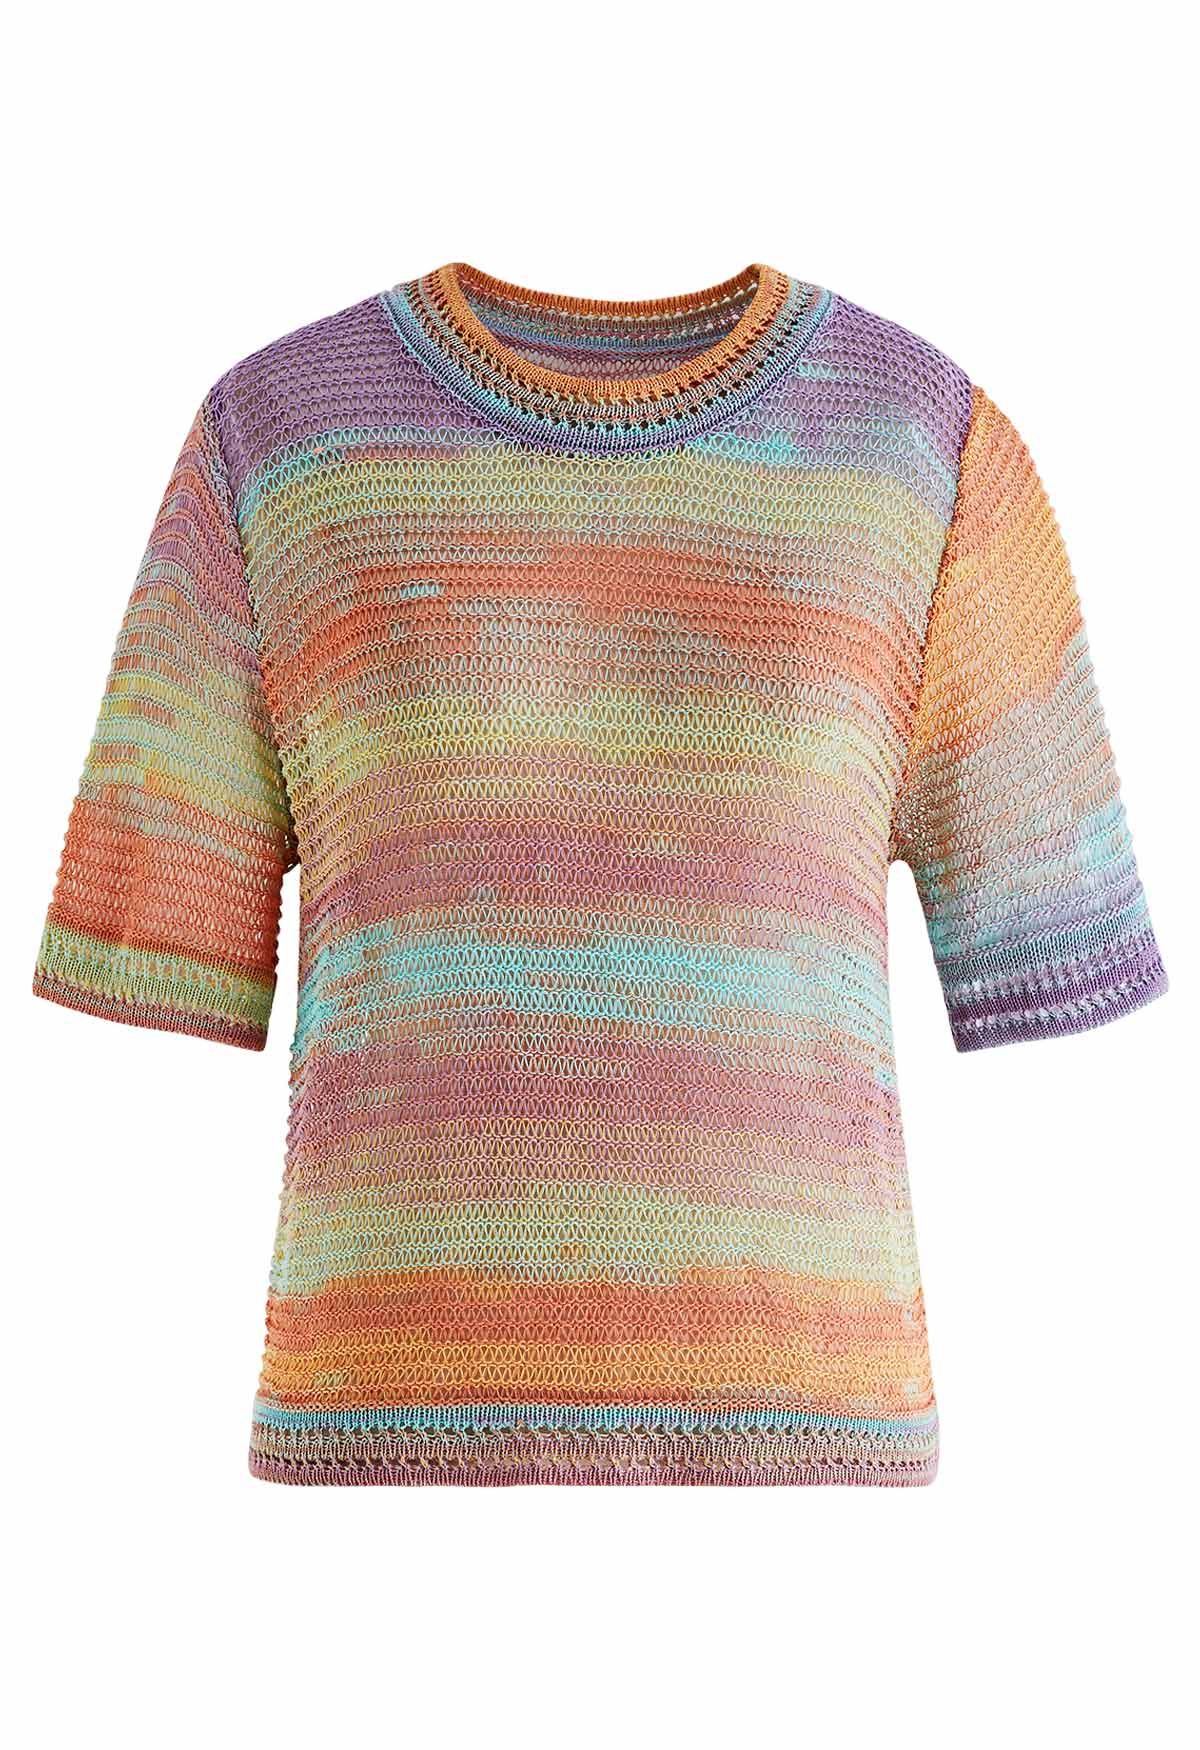 Multicolored Hollow Out Short Sleeve Top